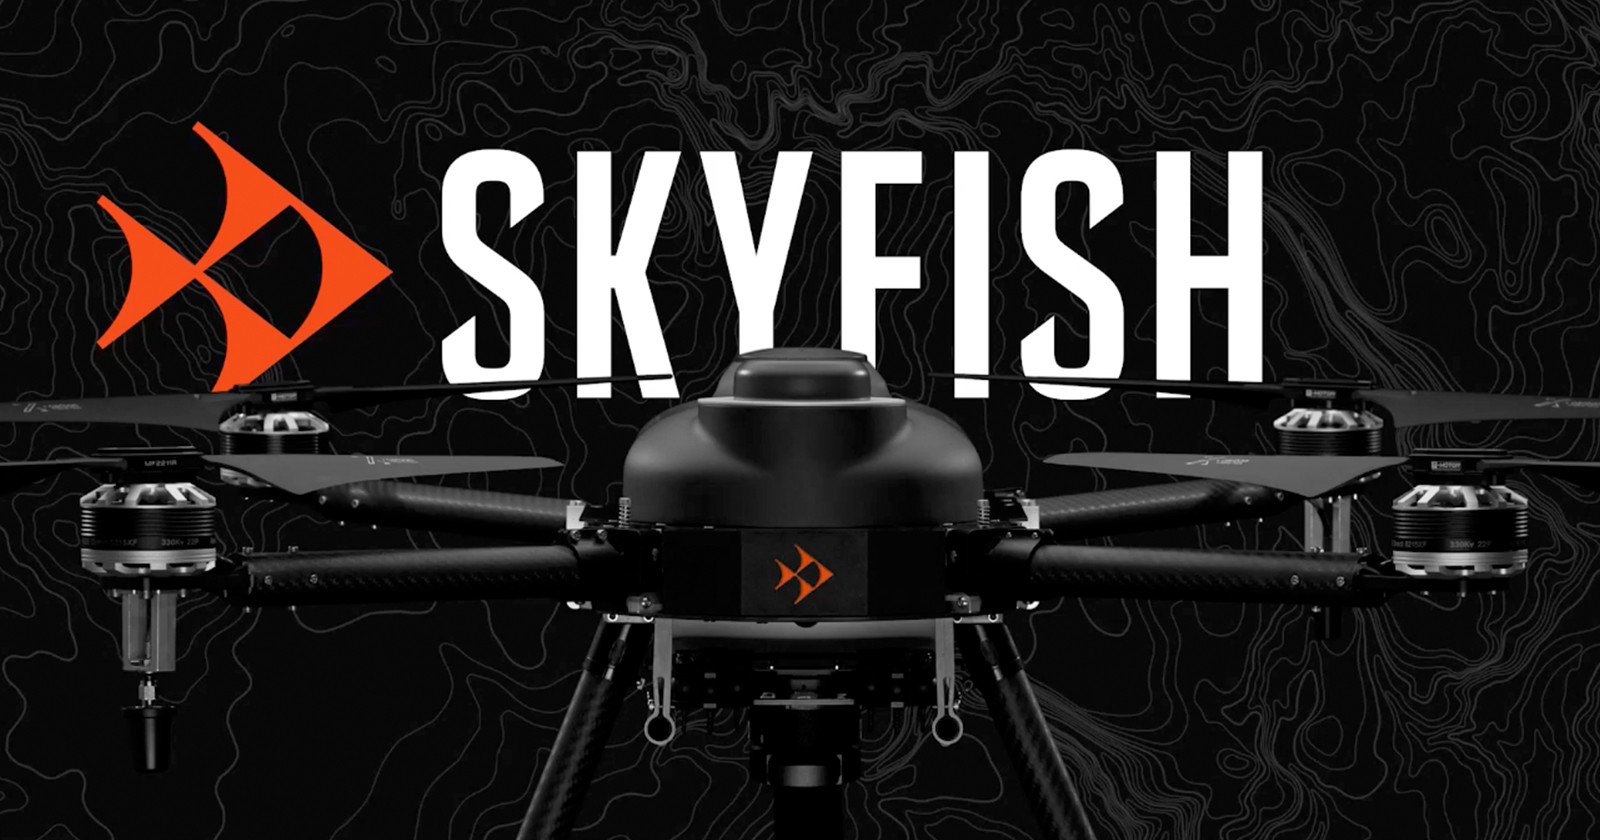 Skyfish Drones Use Sony Cameras to Precisely 3D Model Large Structures